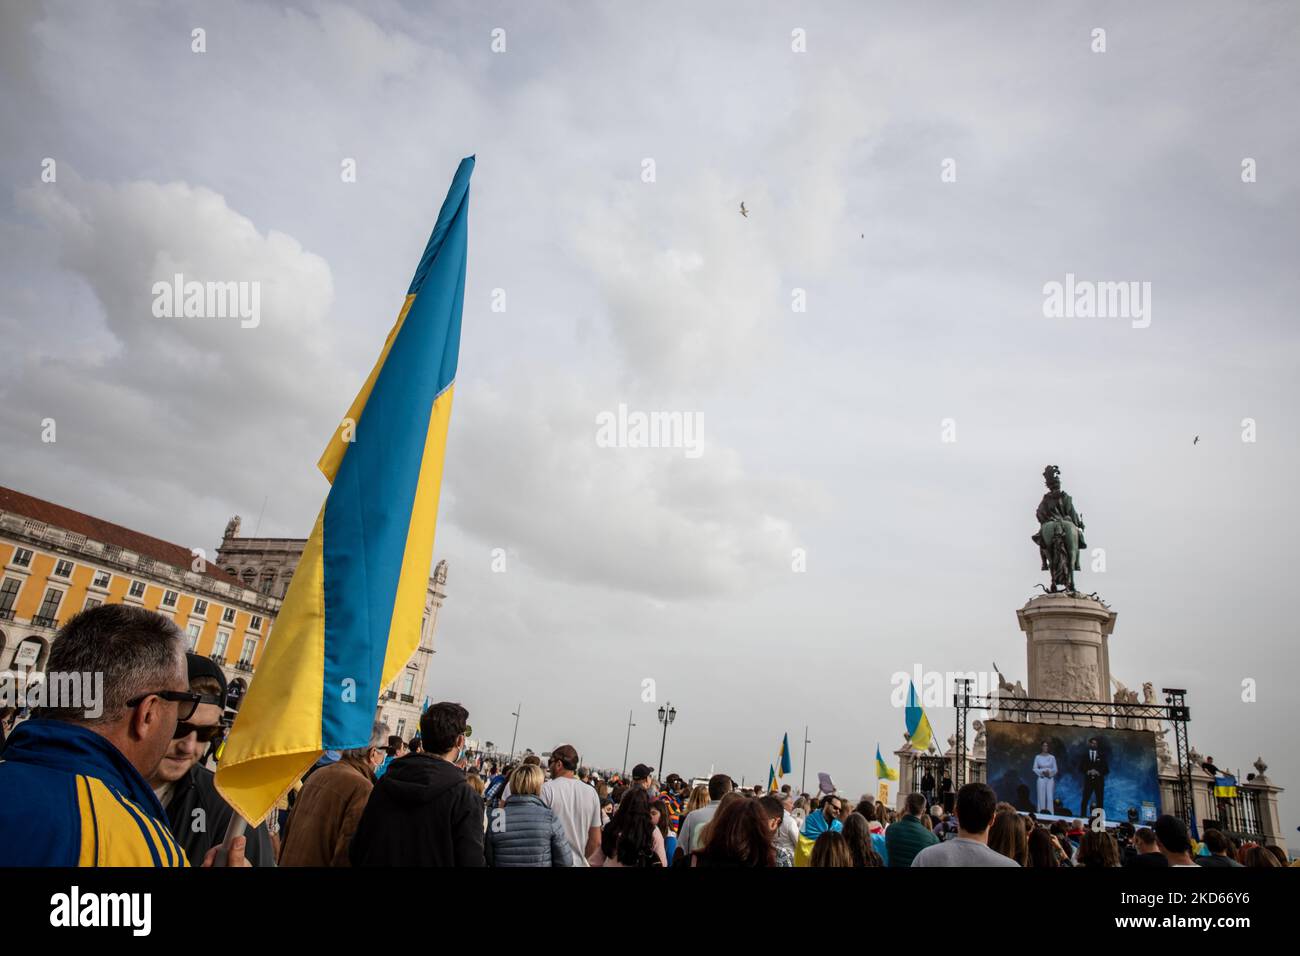 An Ukrainian flag (Ukraine National Flag) is seen in Praca do Comercio, in Lisbon, Portugal during a demonstration to show solidarity with the people of that country following the Russian invasion on March 27, 2022. - More than 3.8 million people have fled Ukraine since Russia's invasion a month ago, UN figures showed on March 27, but the flow of refugees has slowed down markedly. The UN refugee agency, UNHCR, said 3,821,049 Ukrainians had fled the country -- an increase of 48,450 from the figures of March 26. (Photo by Manuel Romano/NurPhoto) Stock Photo